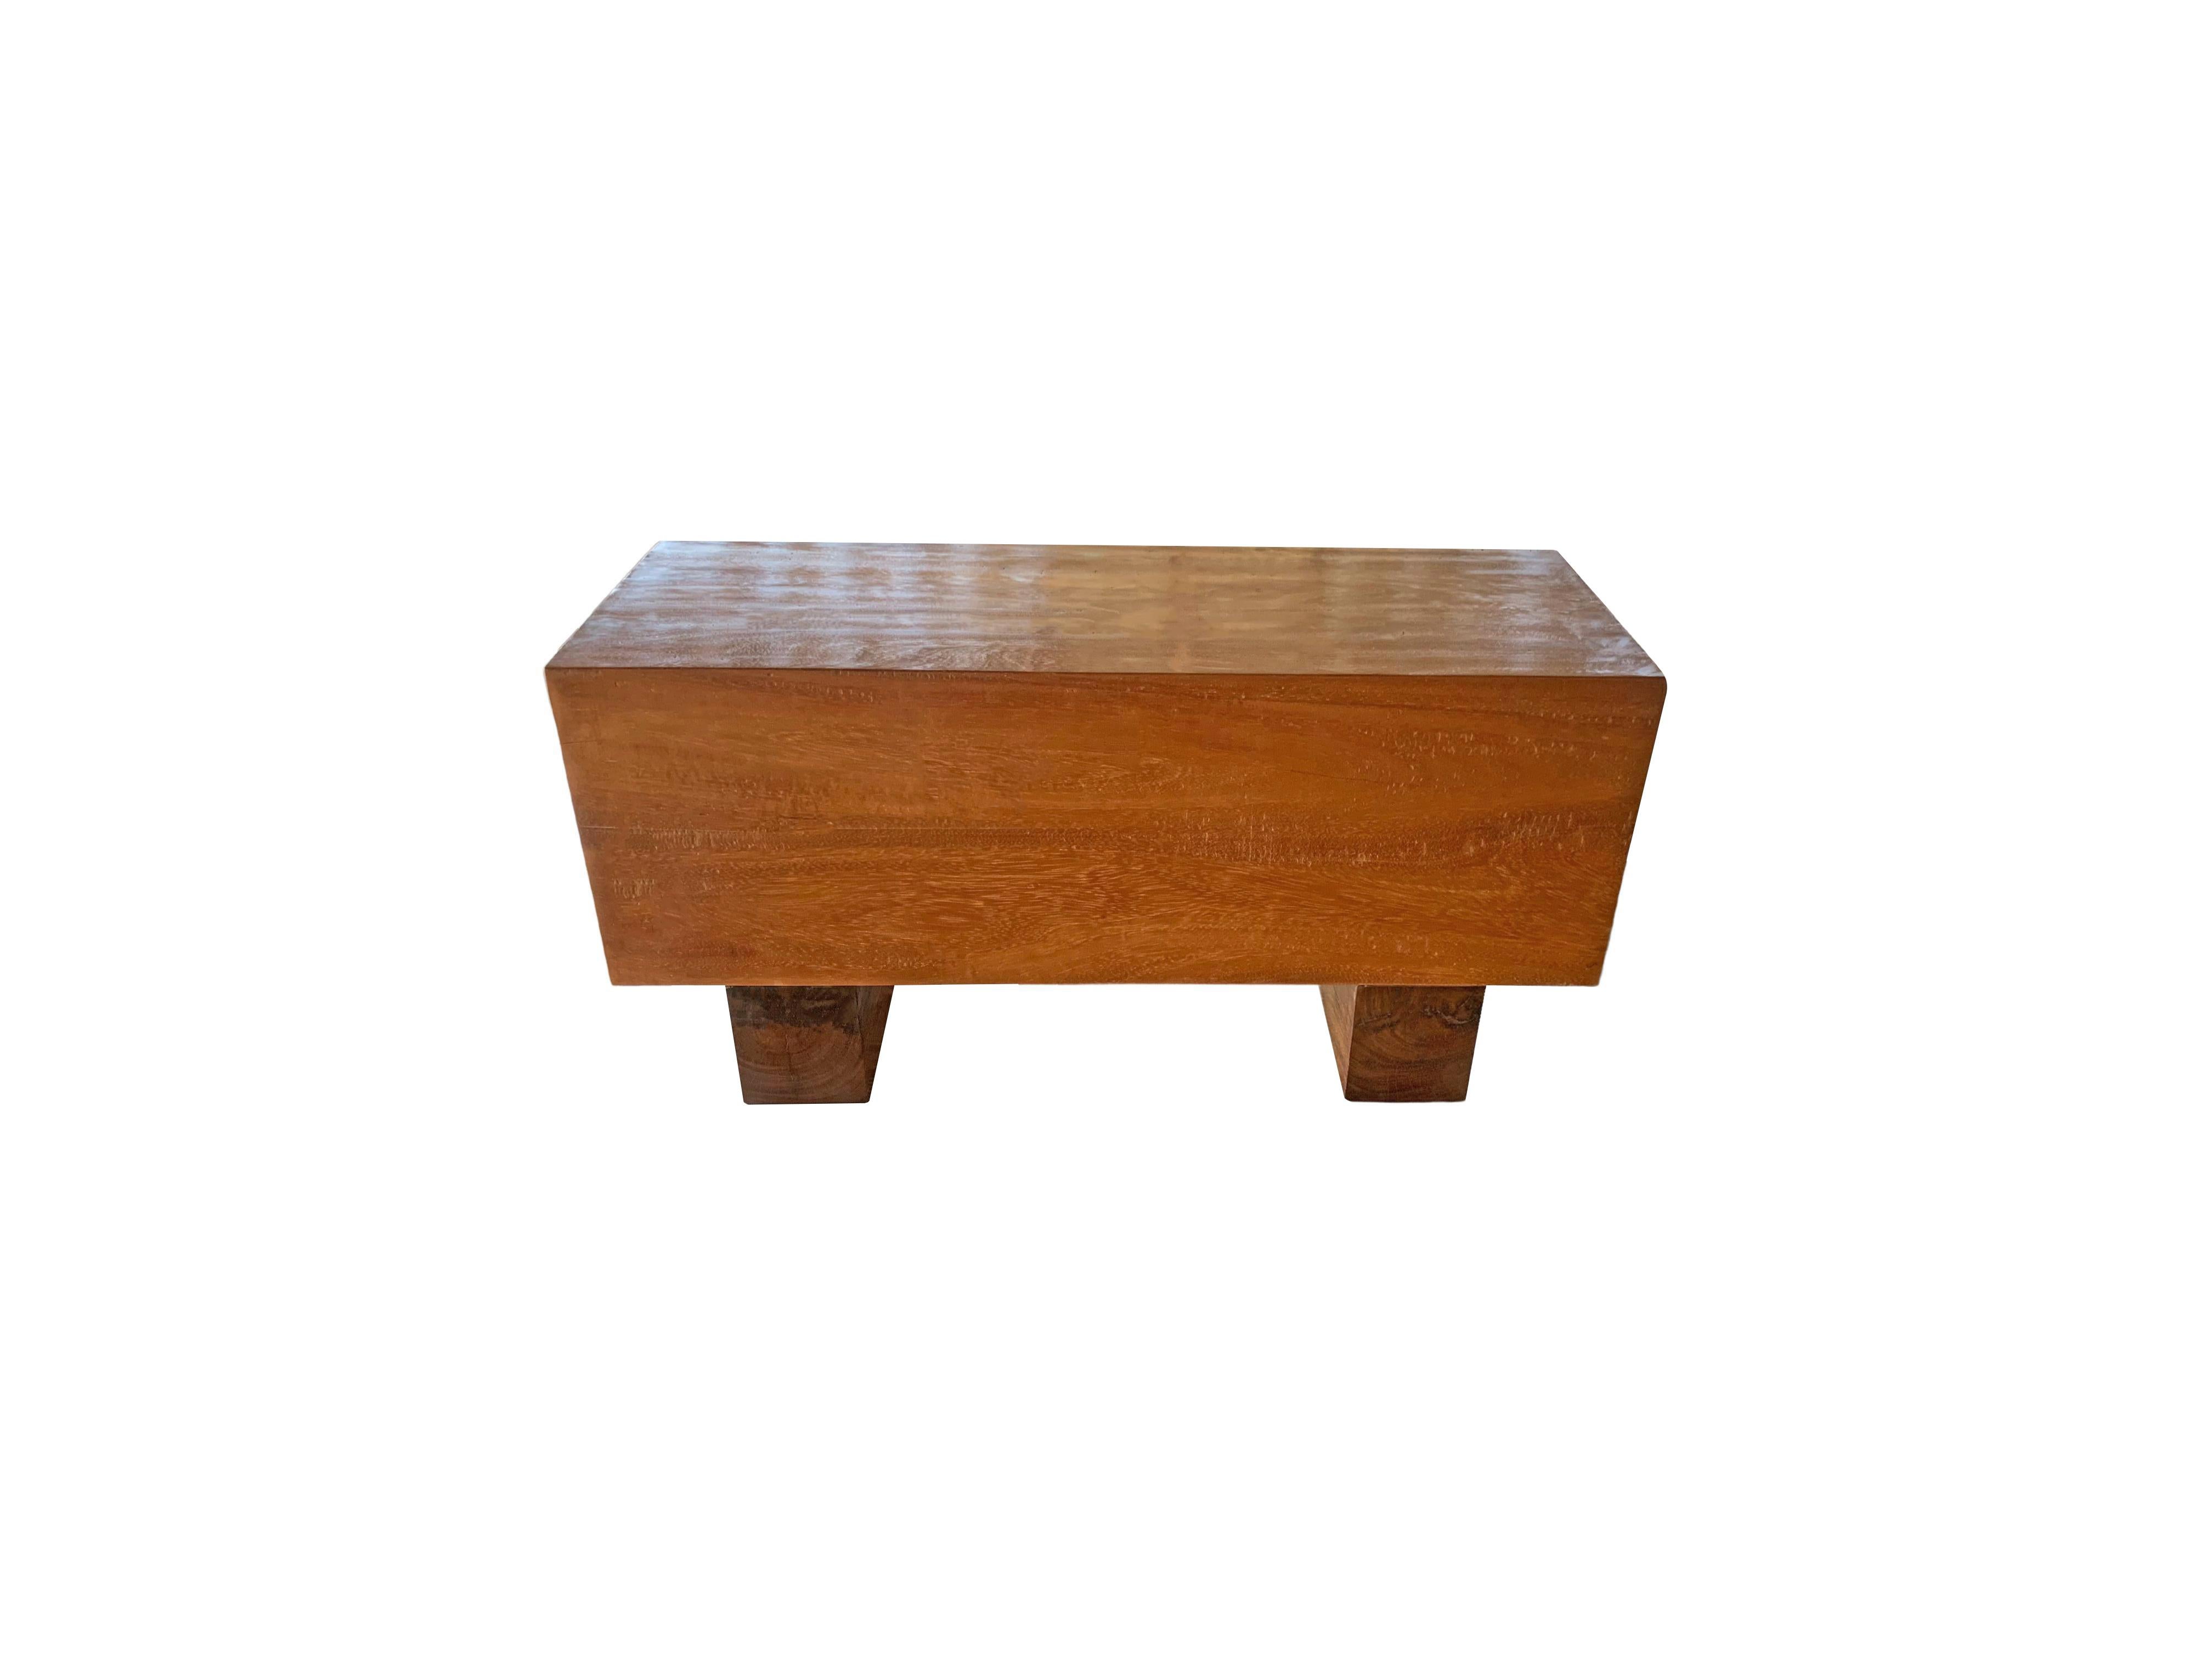 This solid teak wood bench features a wonderful organic form with a mix of wood textures and shades. Elevated by two solid teak wood legs, the seat and legs were carved from single blocks of wood. A wonderful addition to bring warmth to any space.